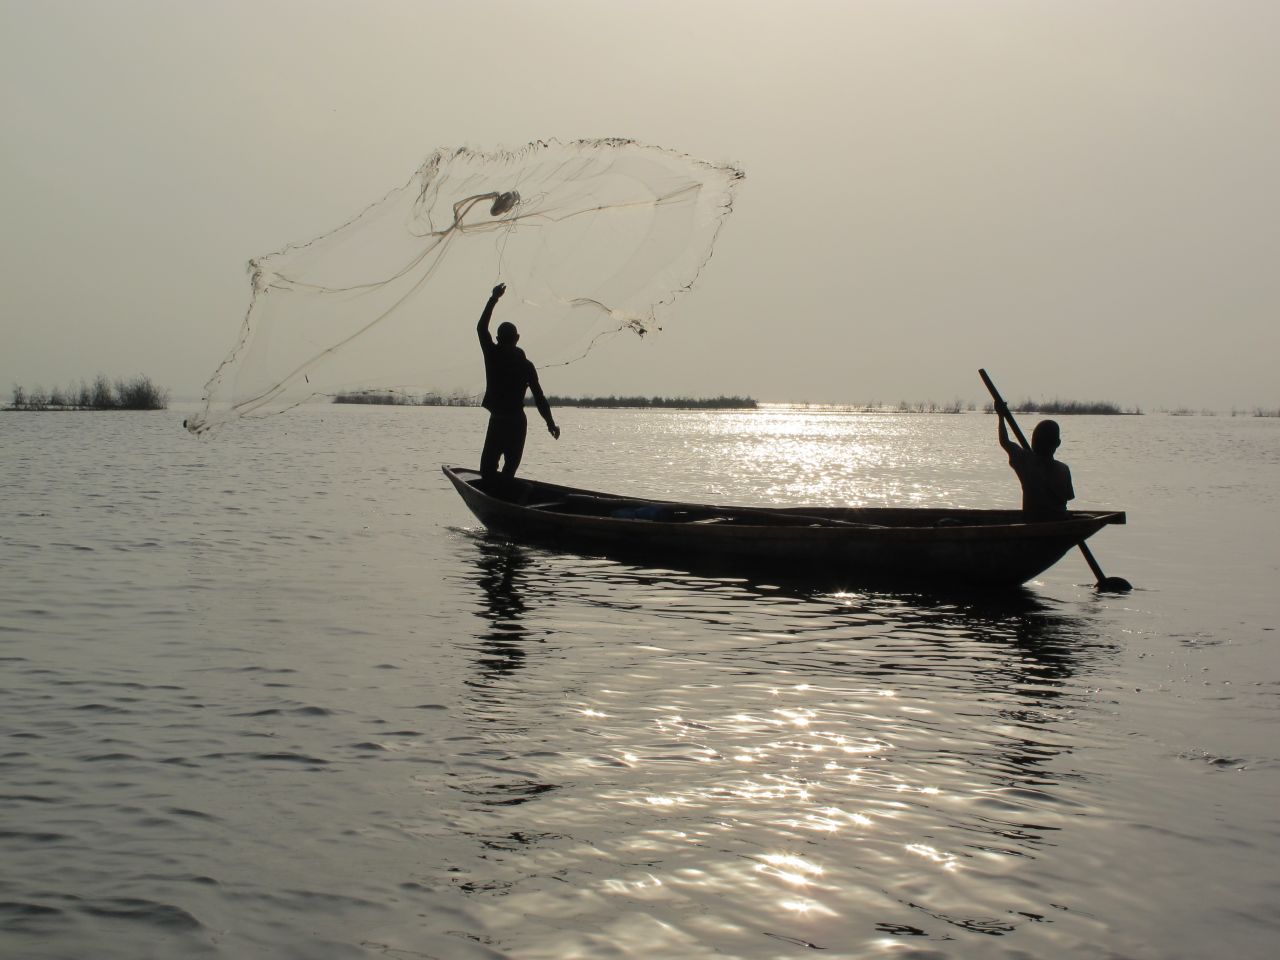 A fisherman throws out his net on the lagoon's calm waters. Fisherman immigrating from Benin and Togo initially settled Makoko over a century ago. But as the population of Lagos exploded to its current size of at least 15 million, so too did the population of Makoko. Estimates are anywhere from 85,000 to 250,000 people live there.